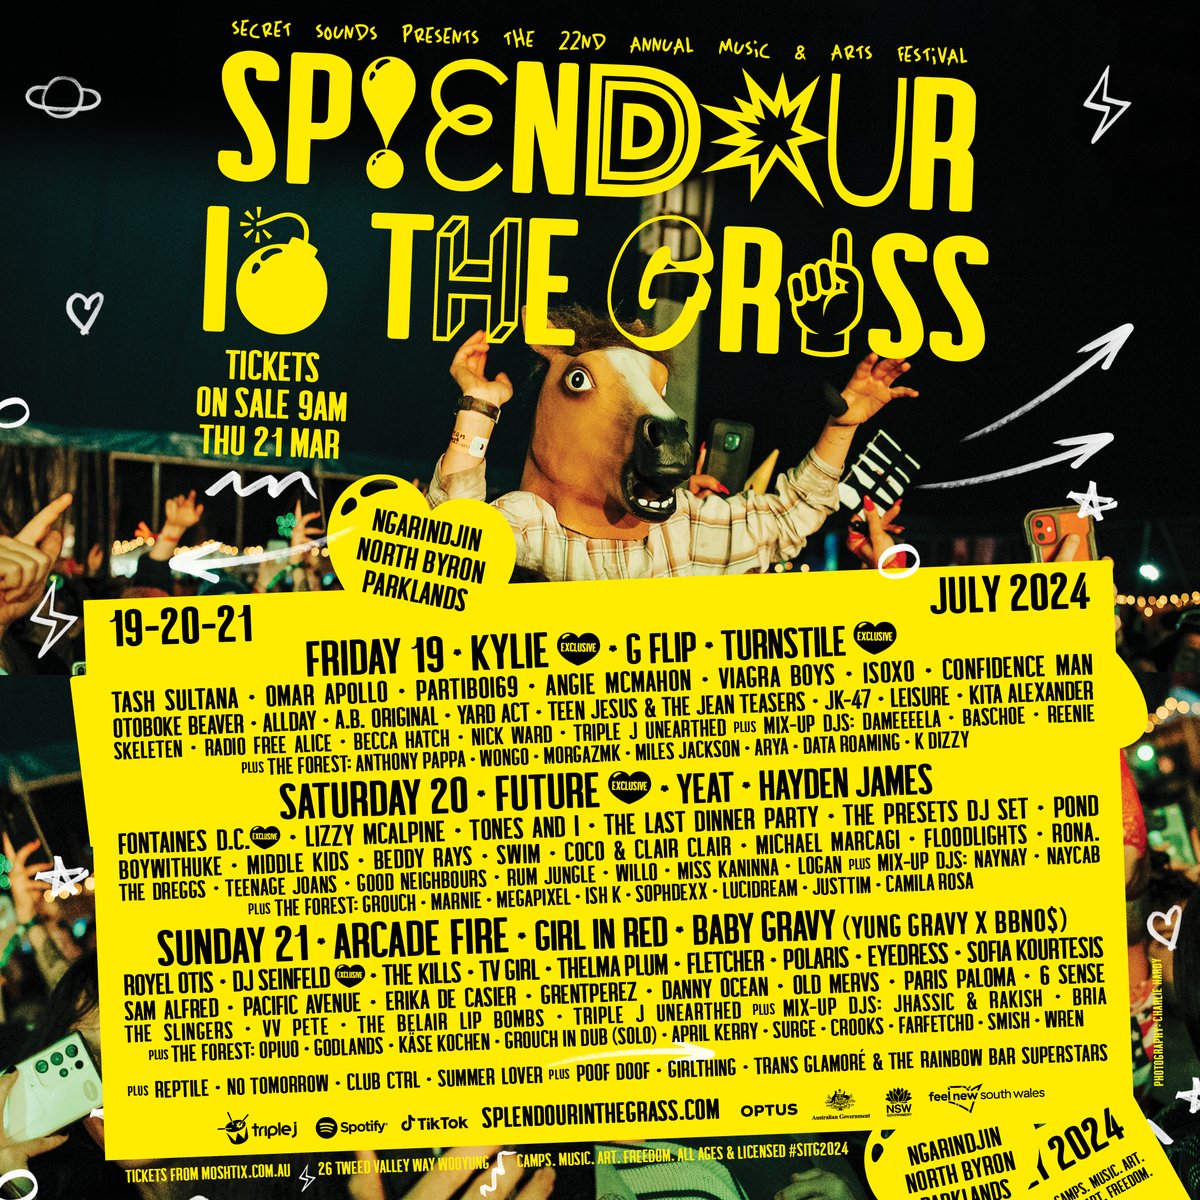 So excited to play @SITG this July! See you soon Australia ❤️‍🔥 splendourinthegrass.com